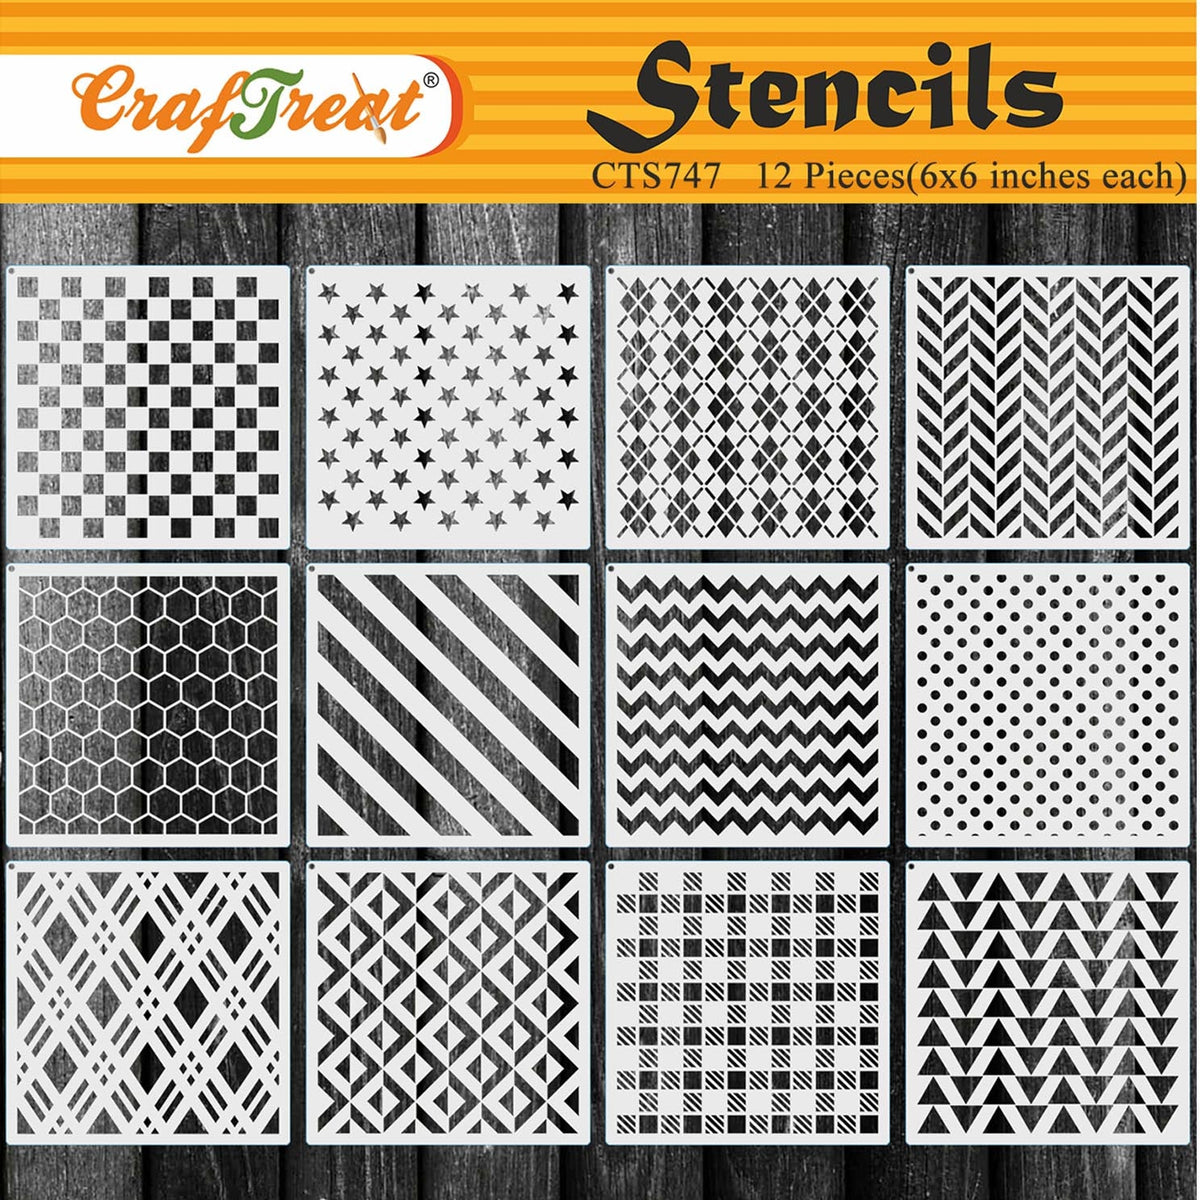 25-Pack Geometric Stencils 6 x 6 Inch Painting Templates for